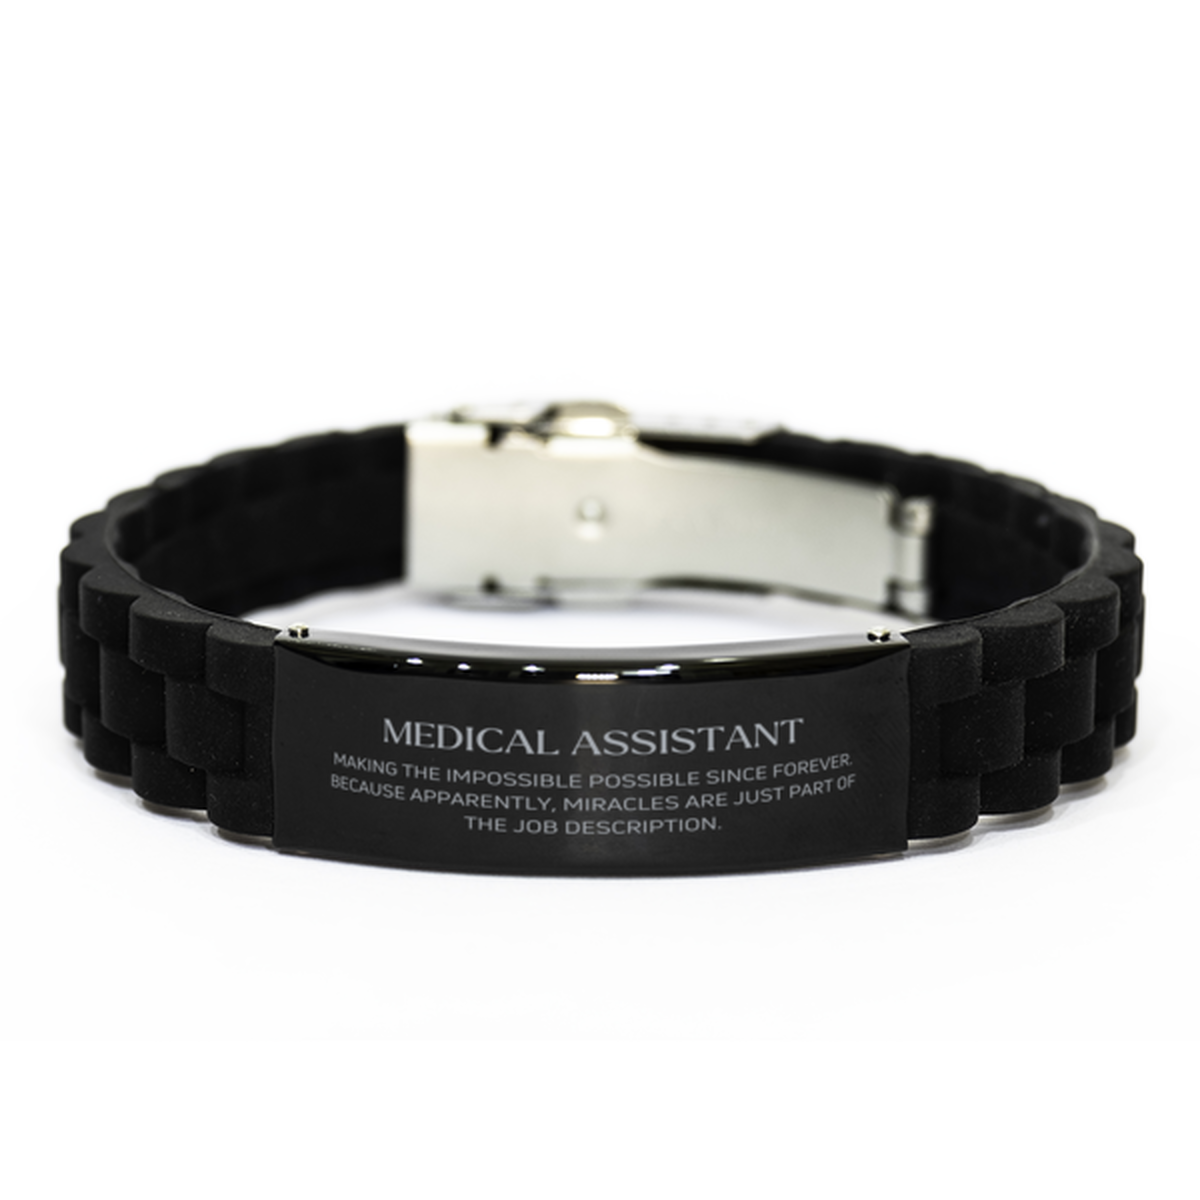 Funny Medical Assistant Gifts, Miracles are just part of the job description, Inspirational Birthday Black Glidelock Clasp Bracelet For Medical Assistant, Men, Women, Coworkers, Friends, Boss